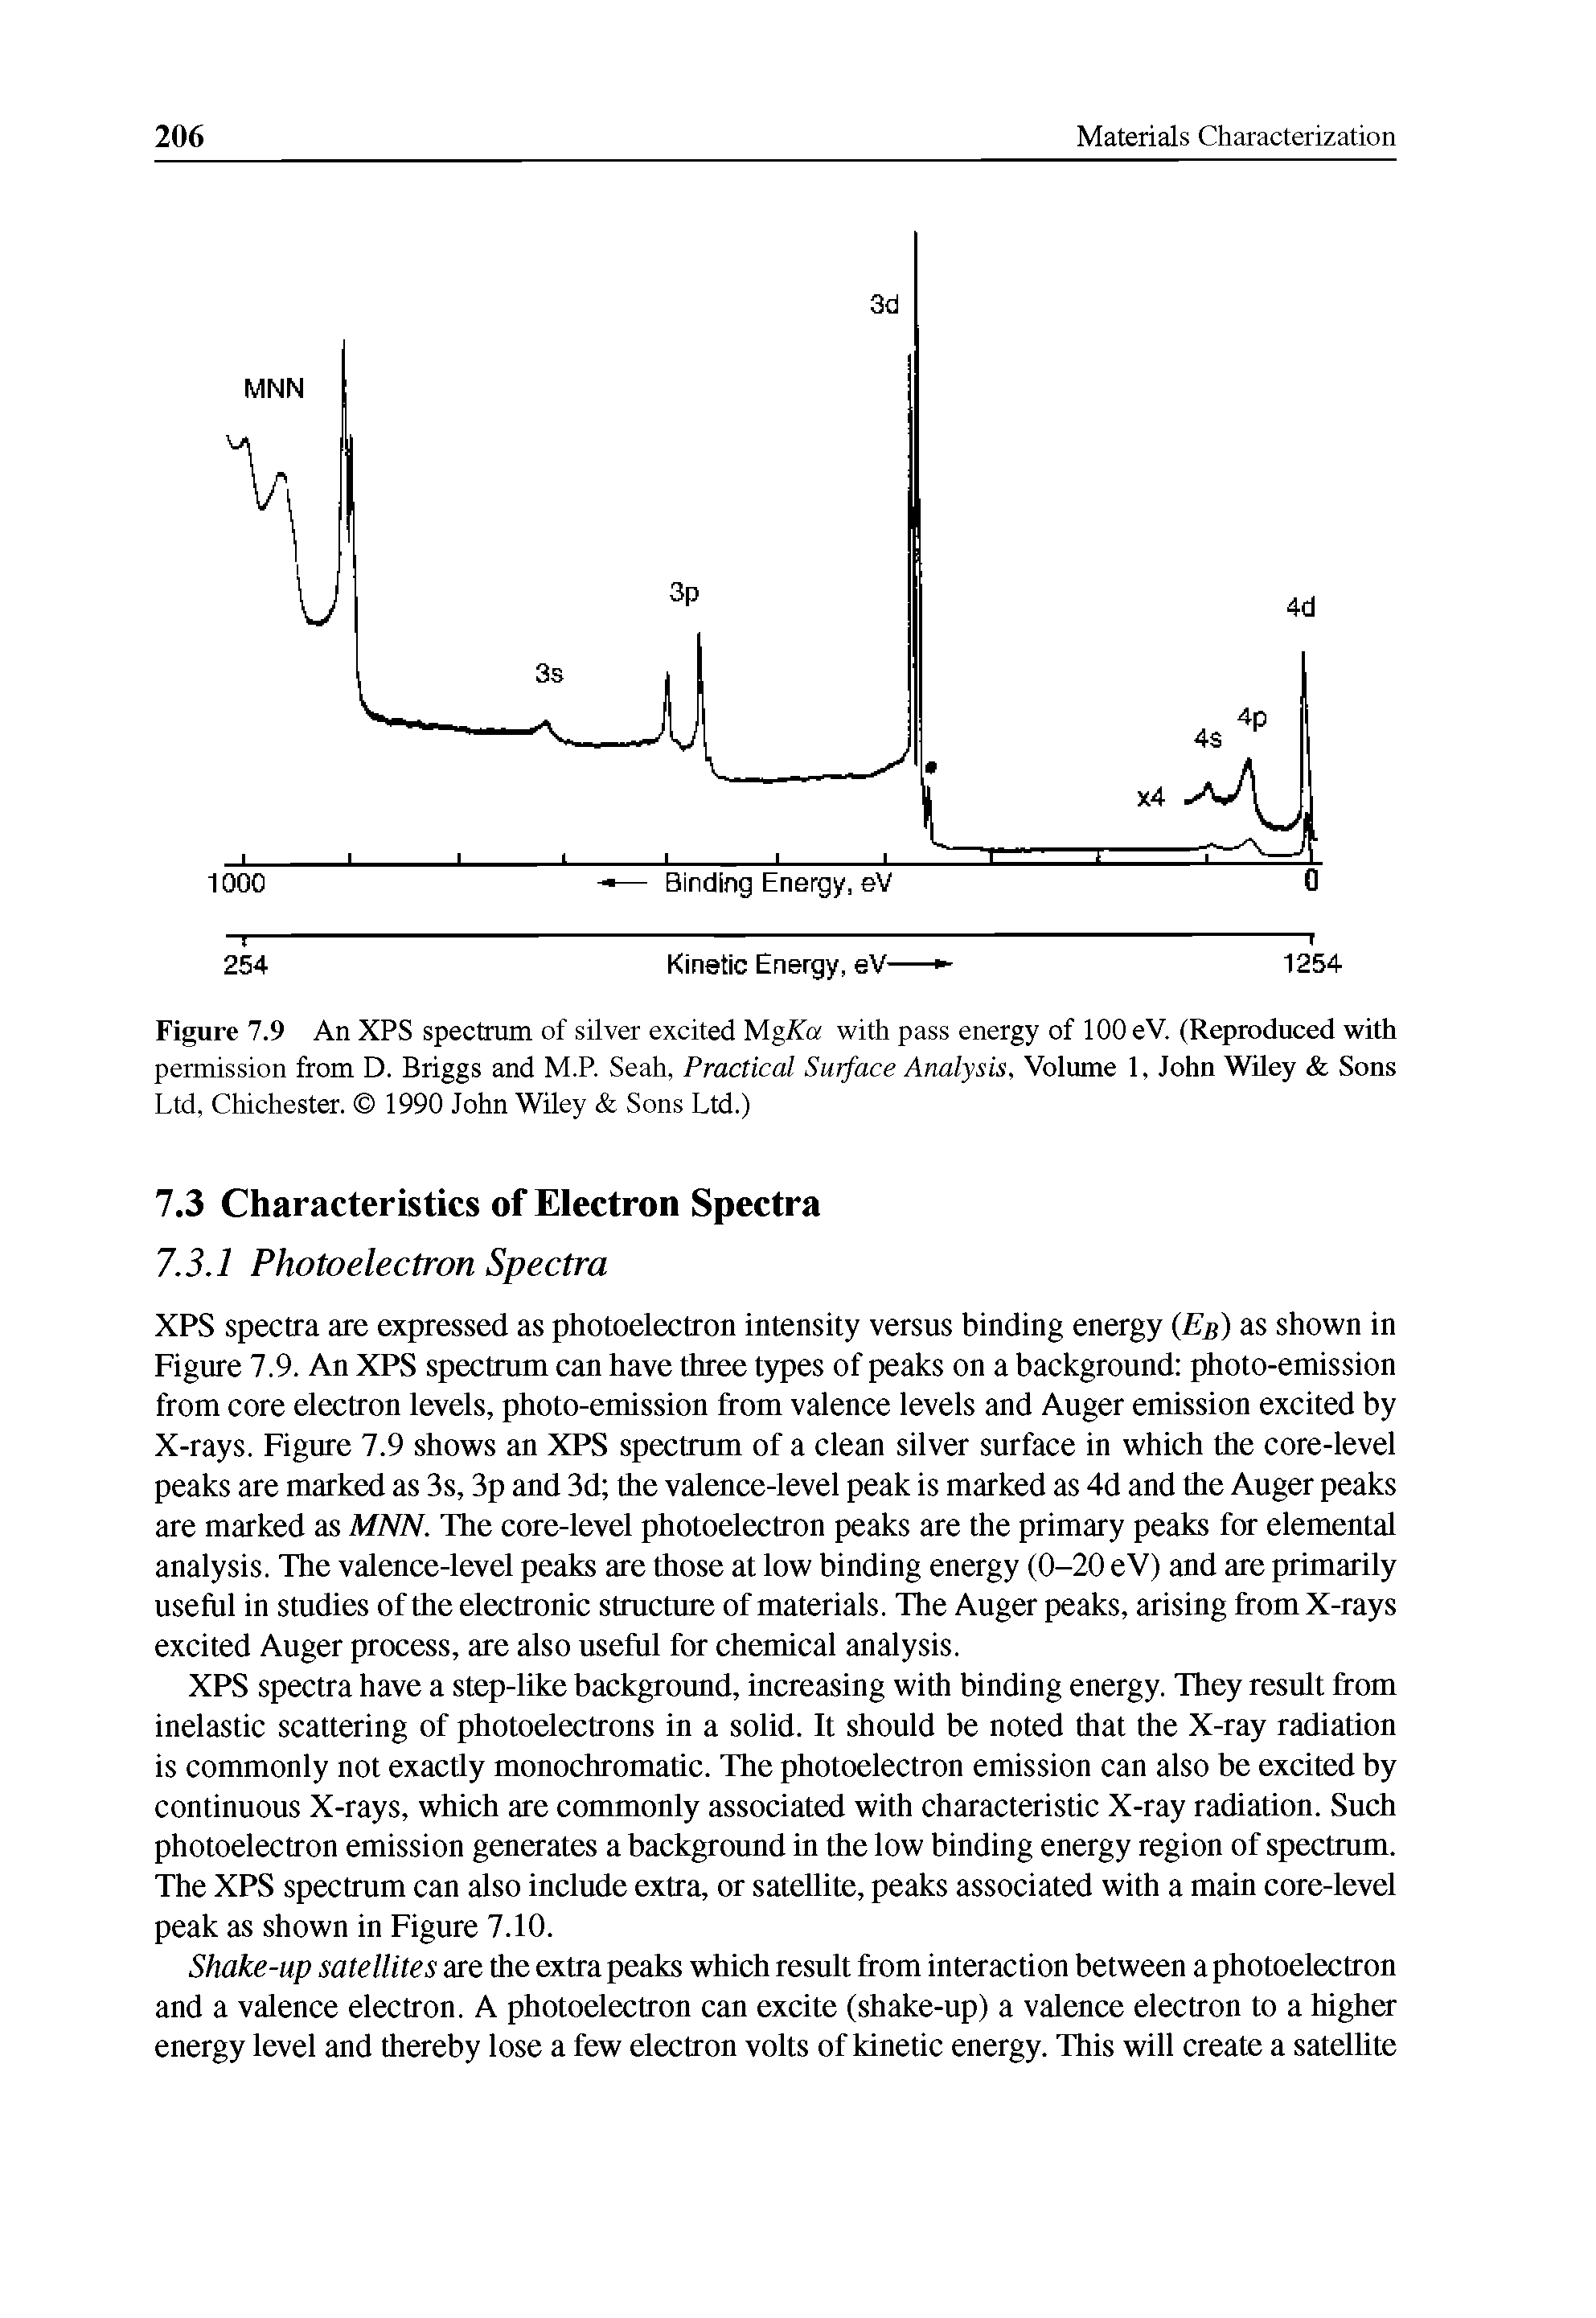 Figure 7.9 An XPS spectrum of silver excited MgXa with pass energy of 100 eV. (Reproduced with permission from D. Briggs and M.P. Seah, Practical Surface Analysis, Volume 1, John Wiley Sons Ltd, Chichester. 1990 John Wiley Sons Ltd.)...